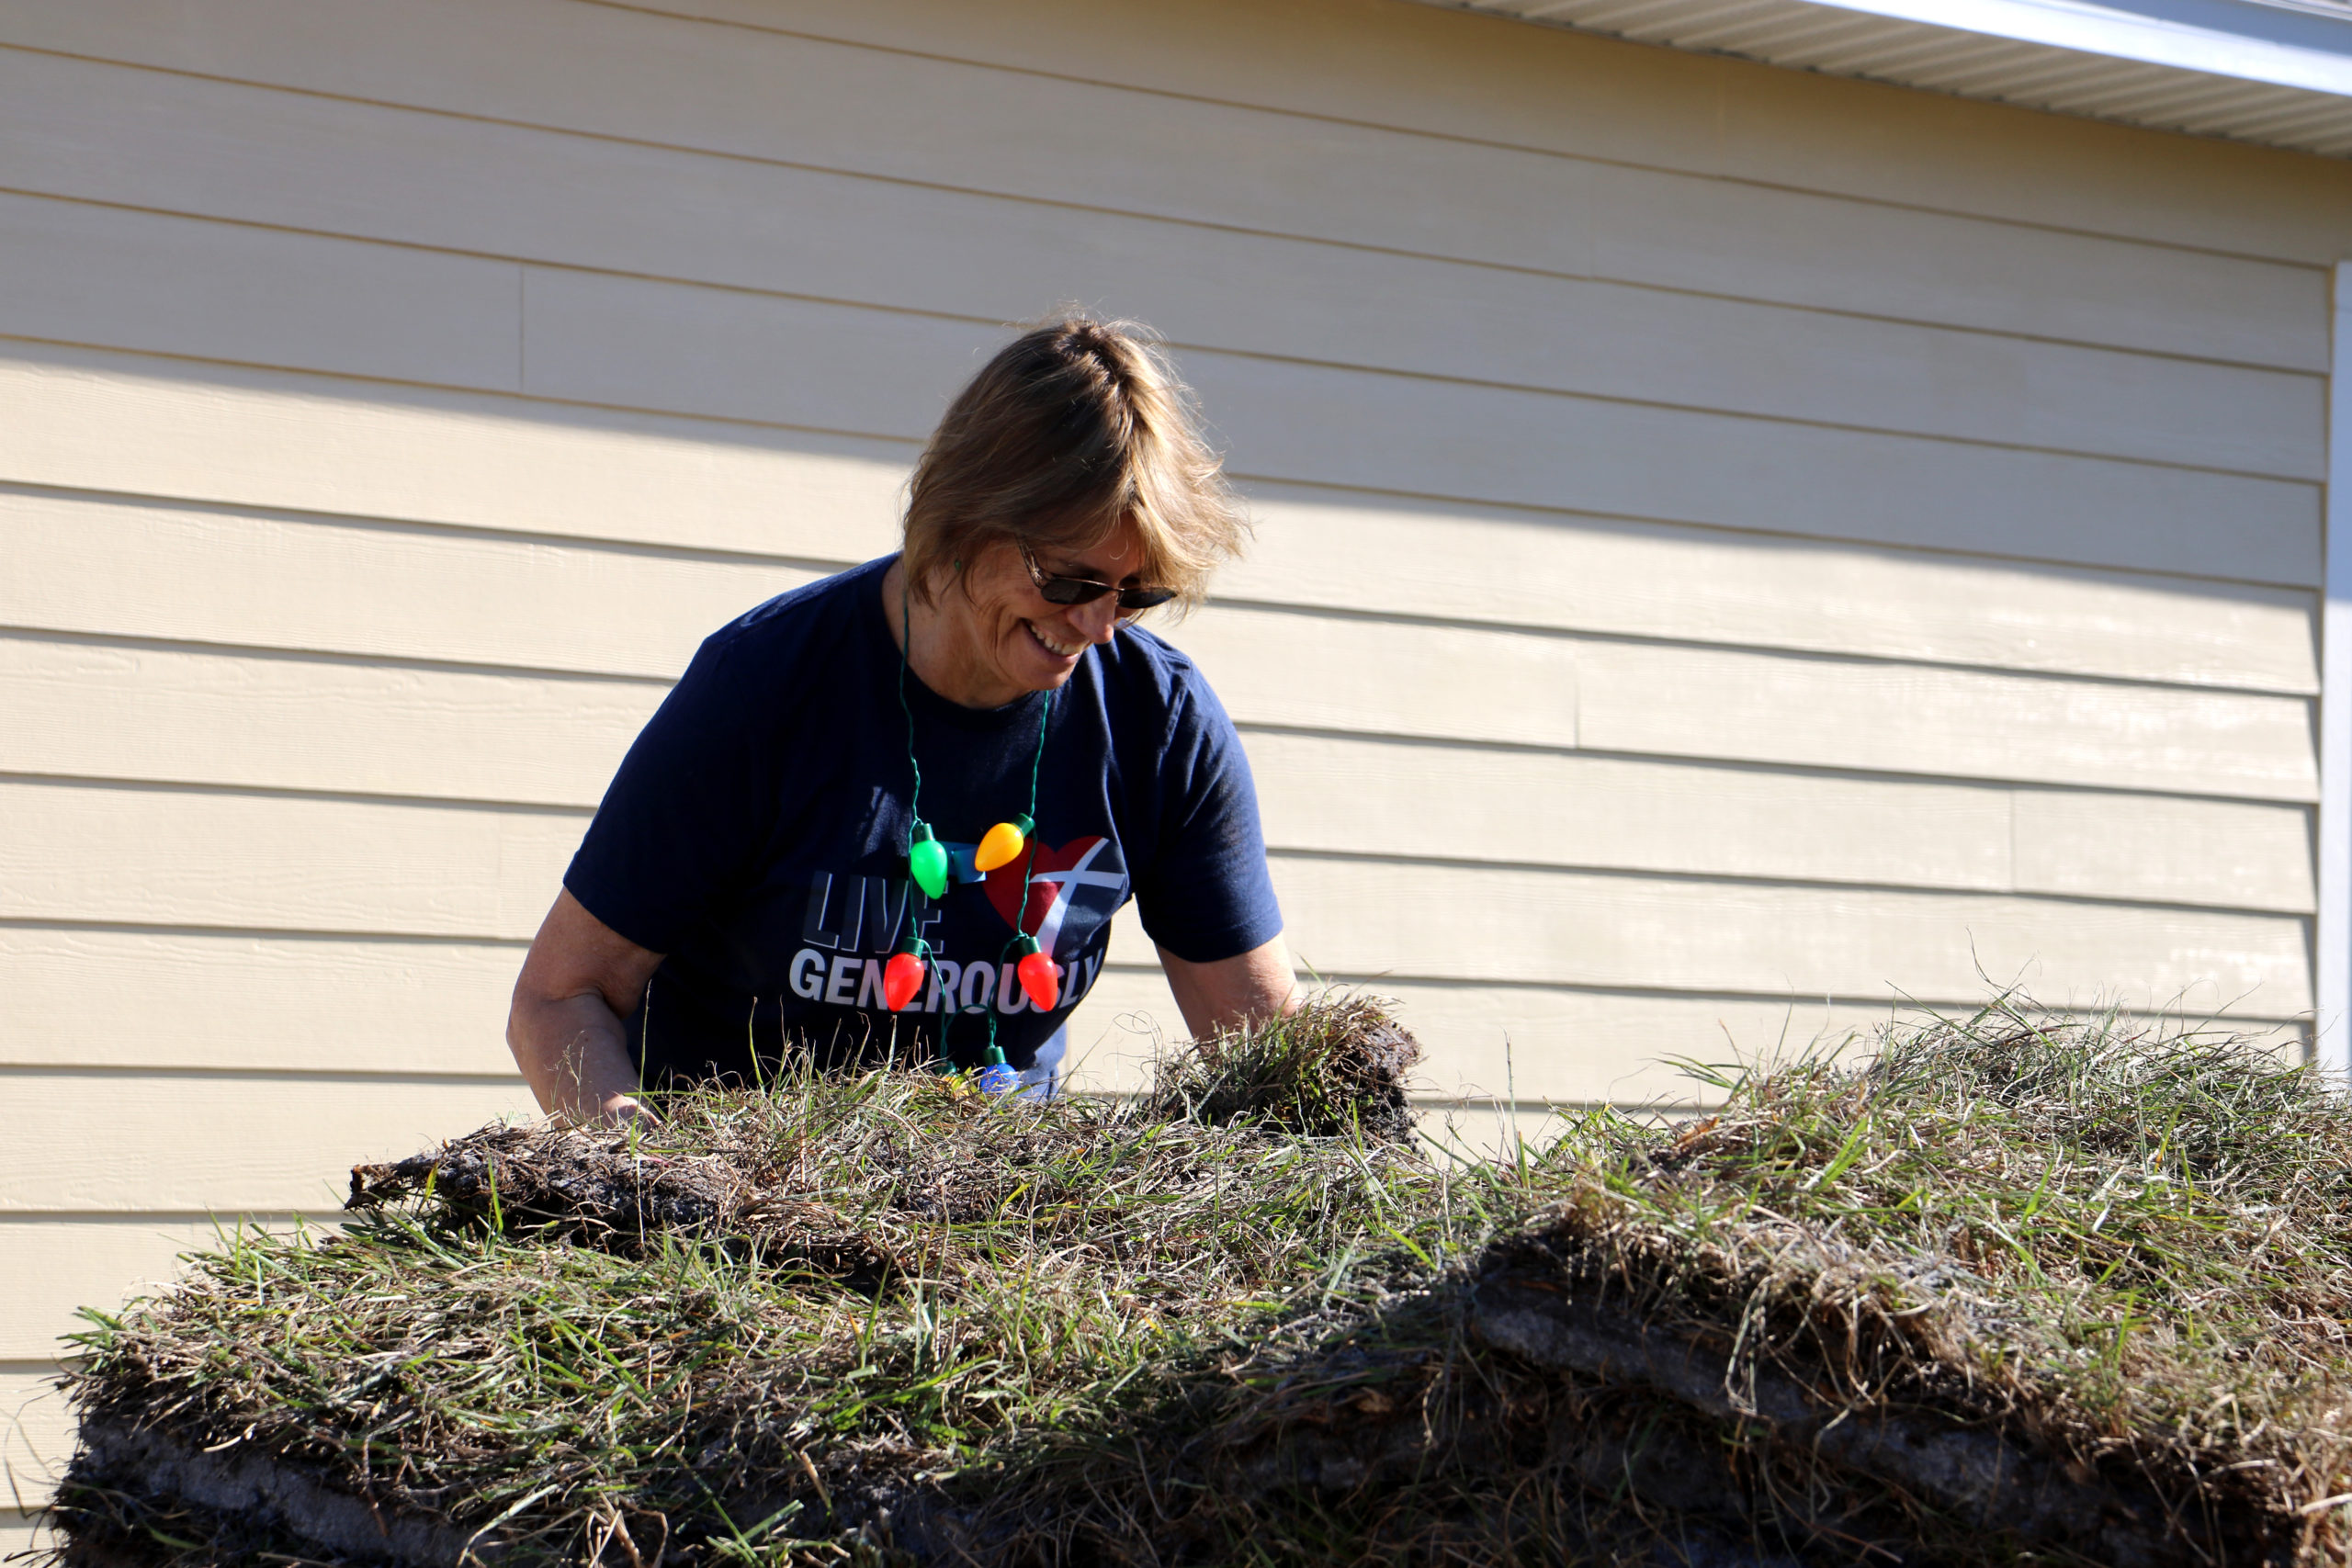 Volunteer smiling and reaching down to lift sod from pile